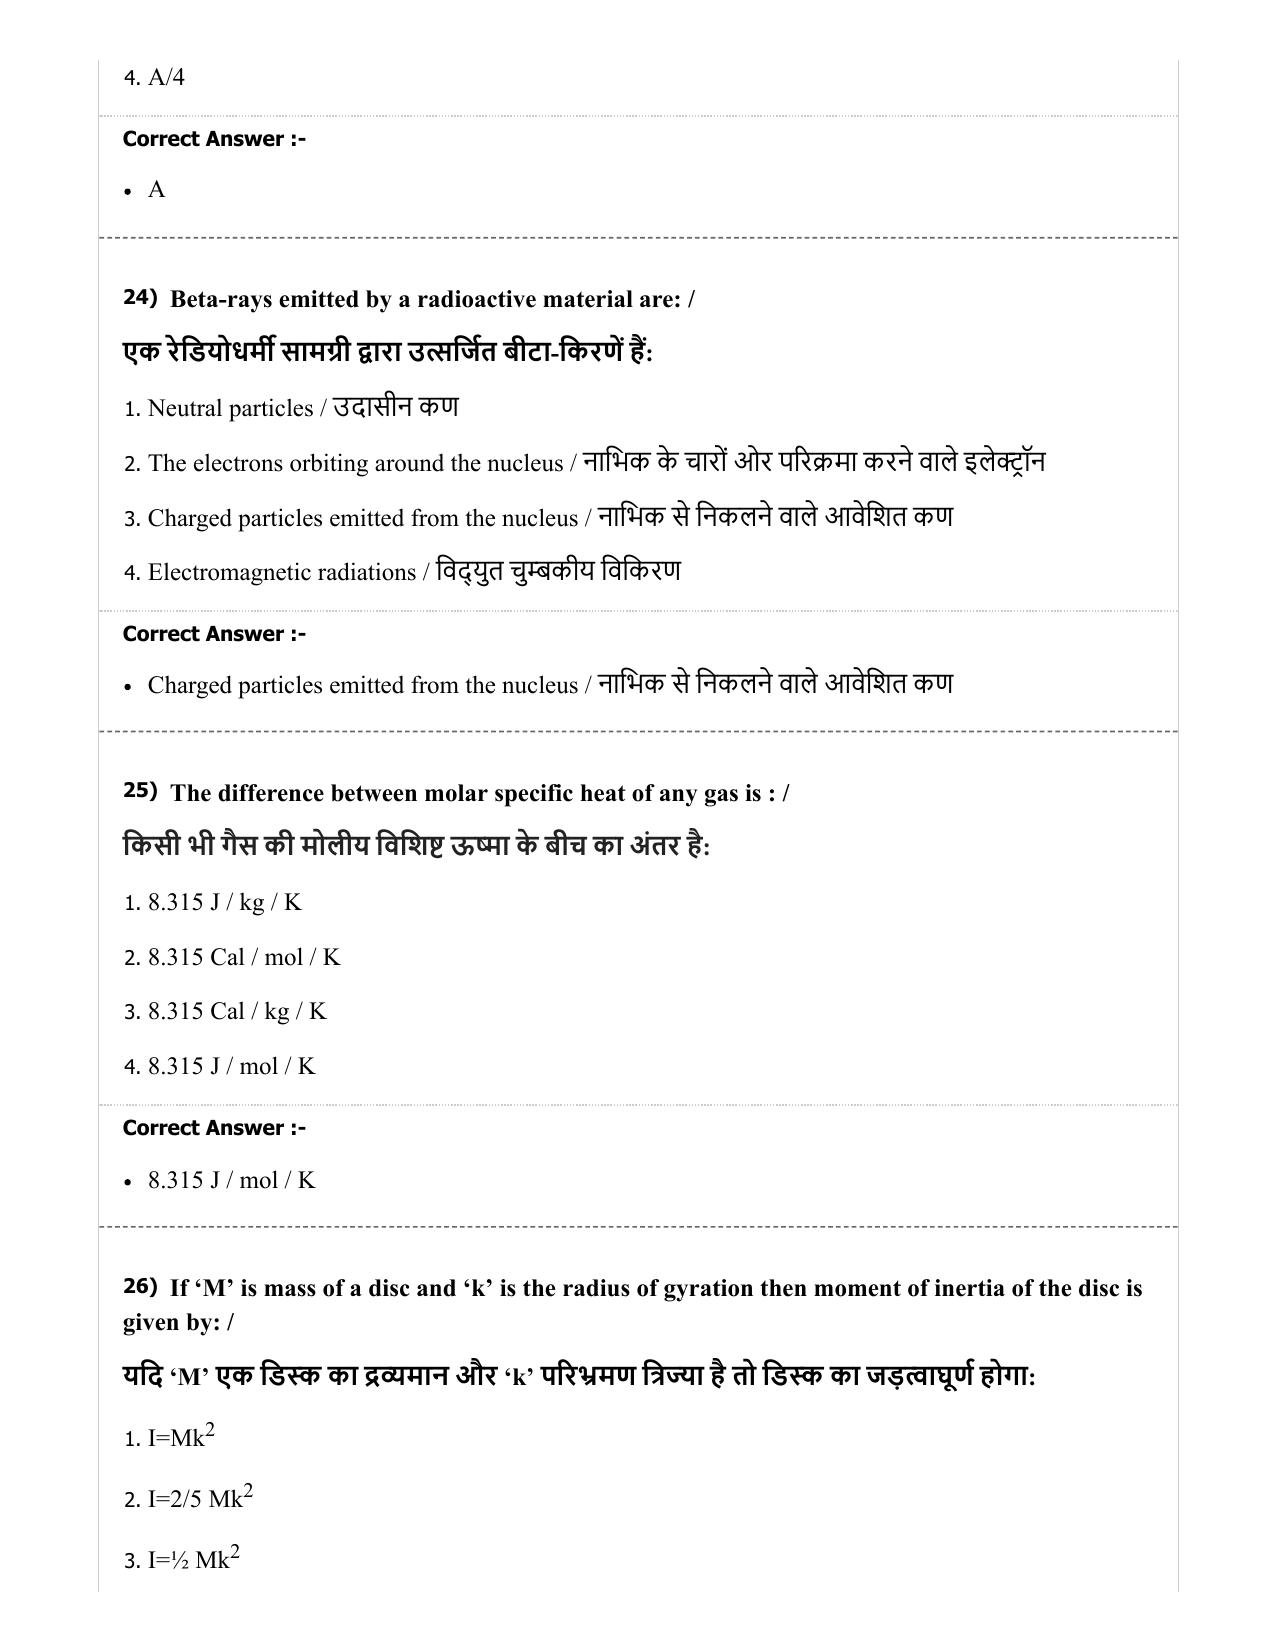 MP PAT (Exam. Date 29/06/2019 Time 2:00 PM) - PCM Question Paper - Page 10